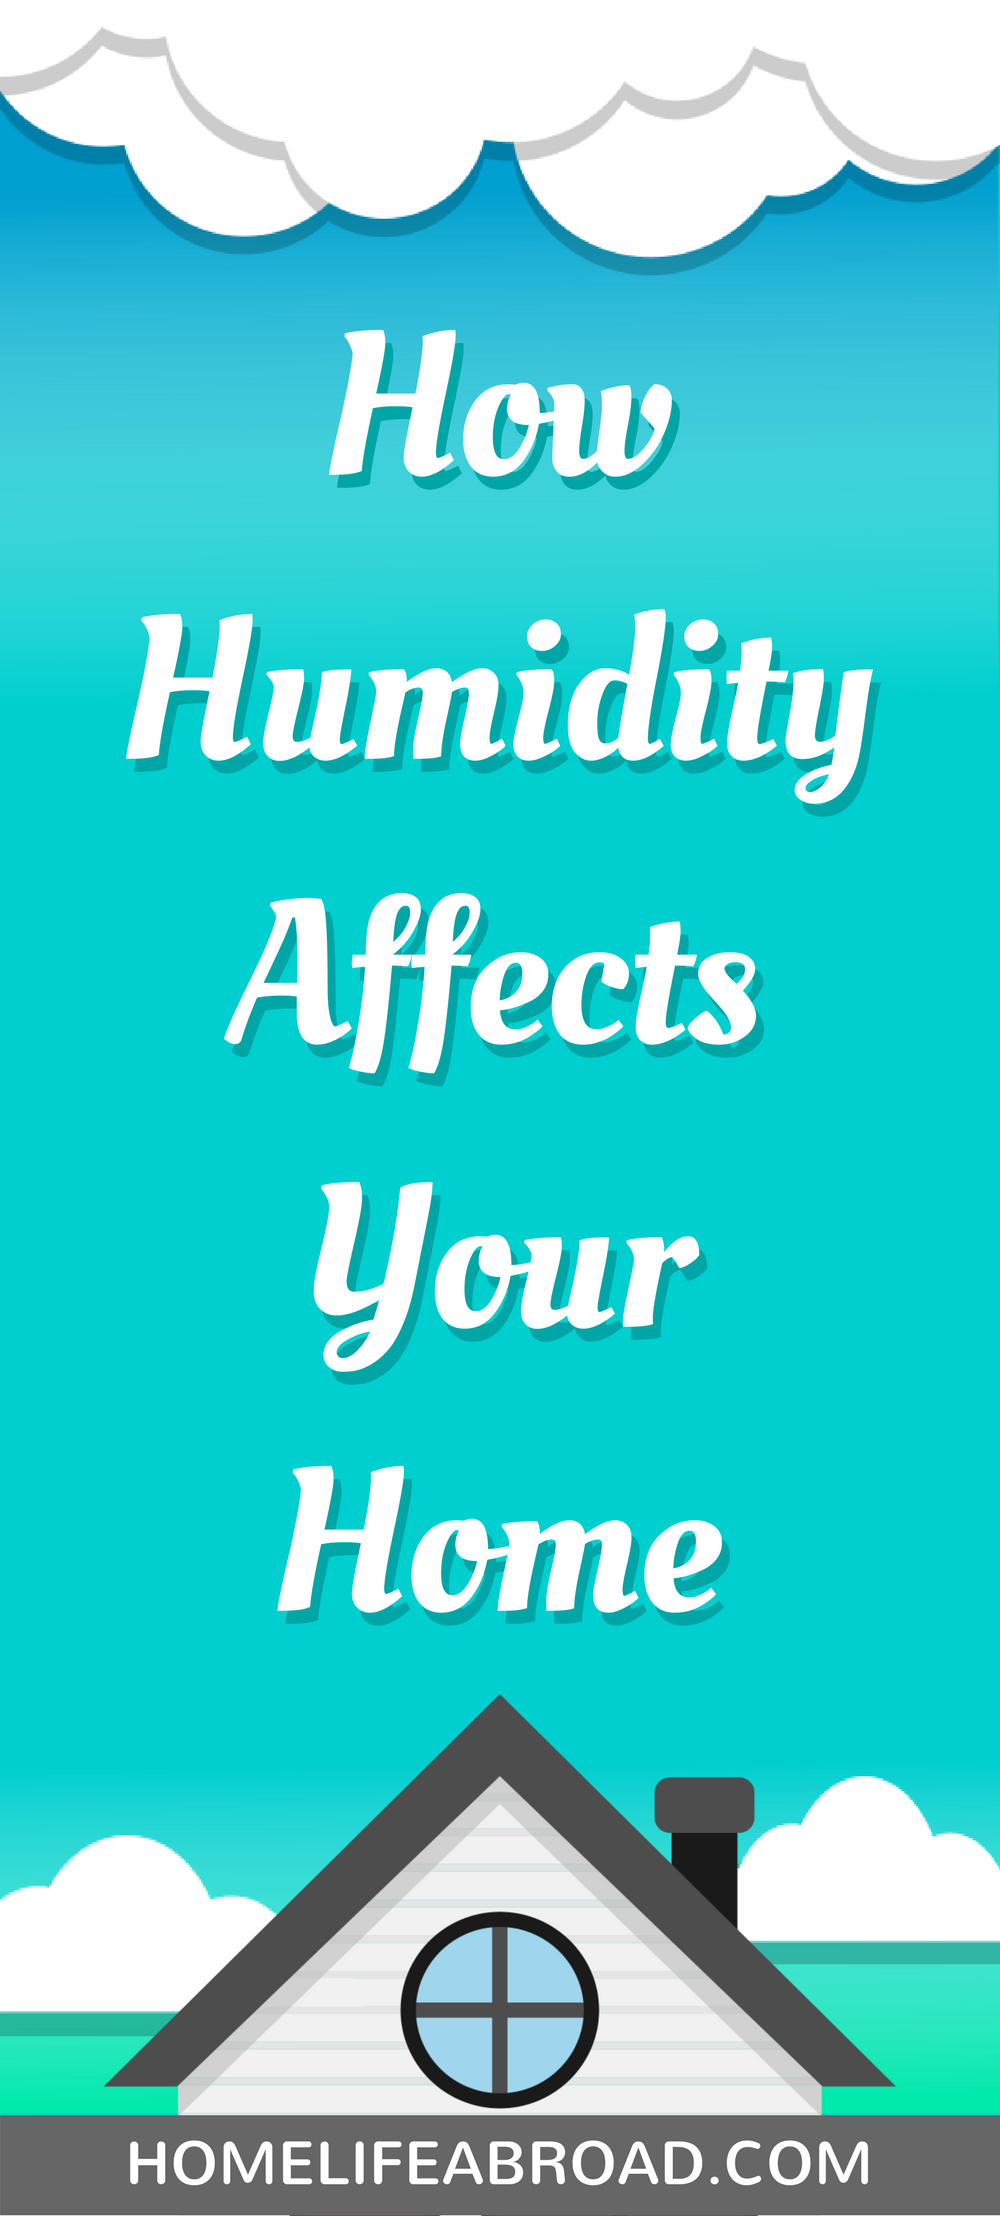 Did you know that humidity can be a danger to your health and home? If you live in a very humid region, learn why you need to level off humidity in your house and stay safe. #humidity #homecare #health